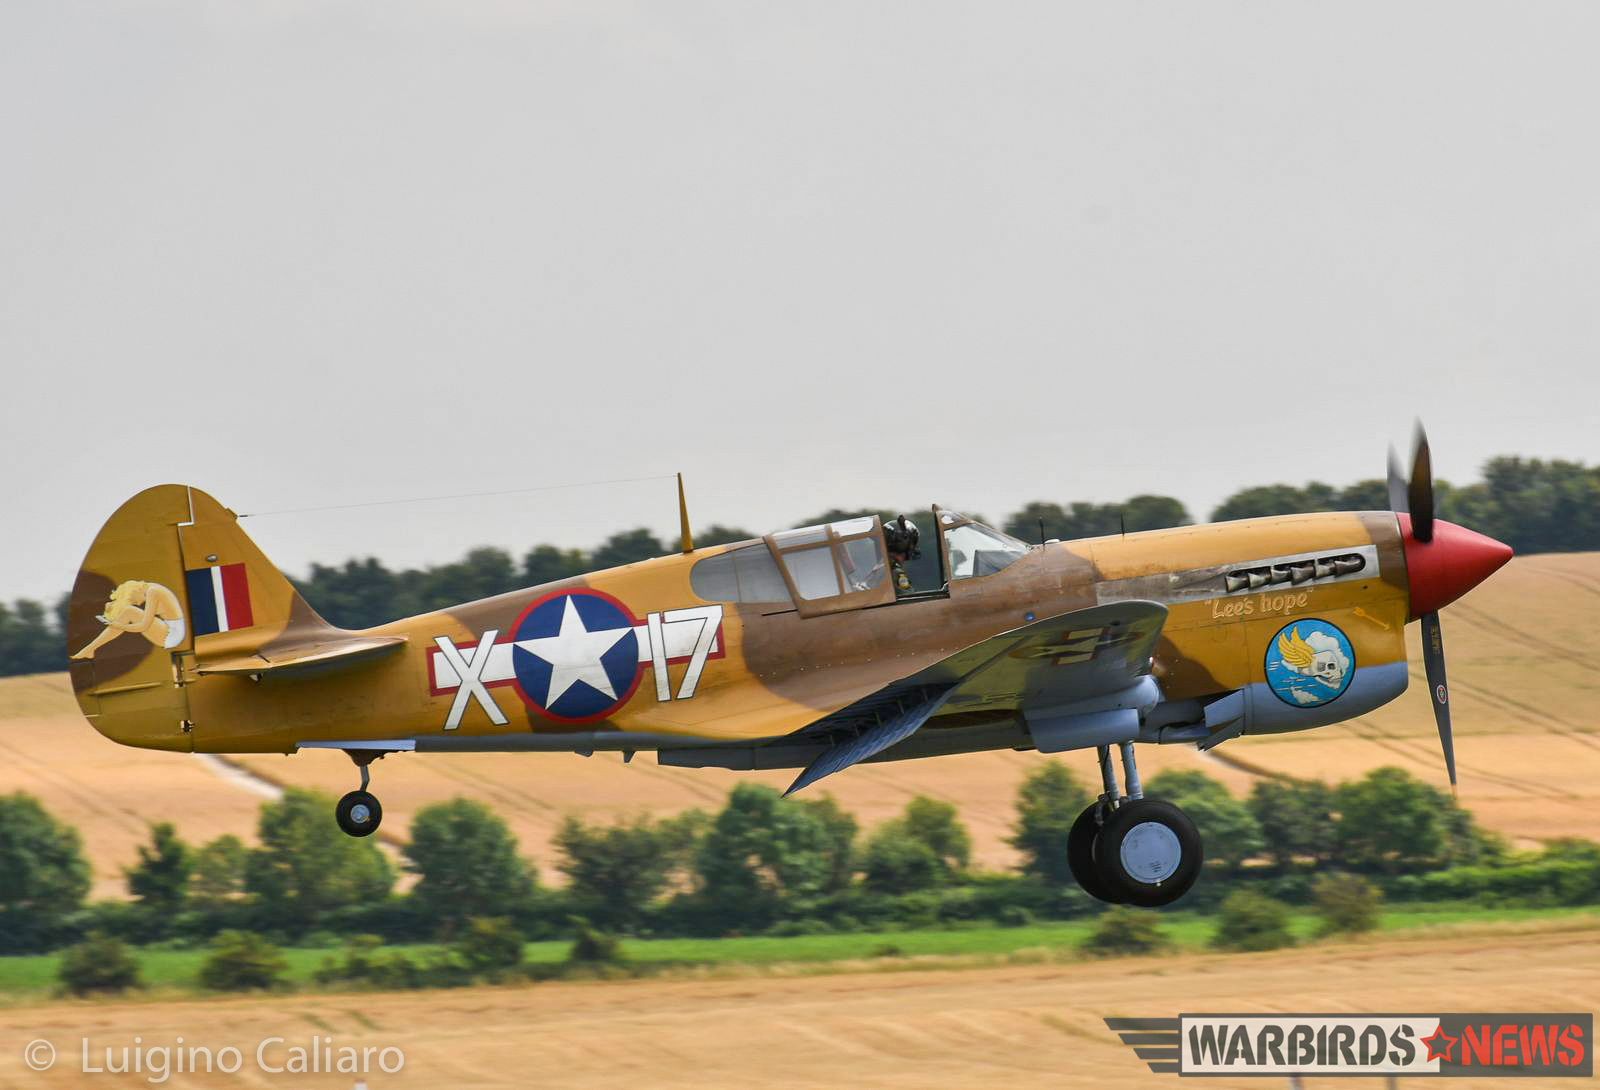 The Fighter Collection's very rare, Merlin-engined P-40F. (photo by Luigino Caliaro)